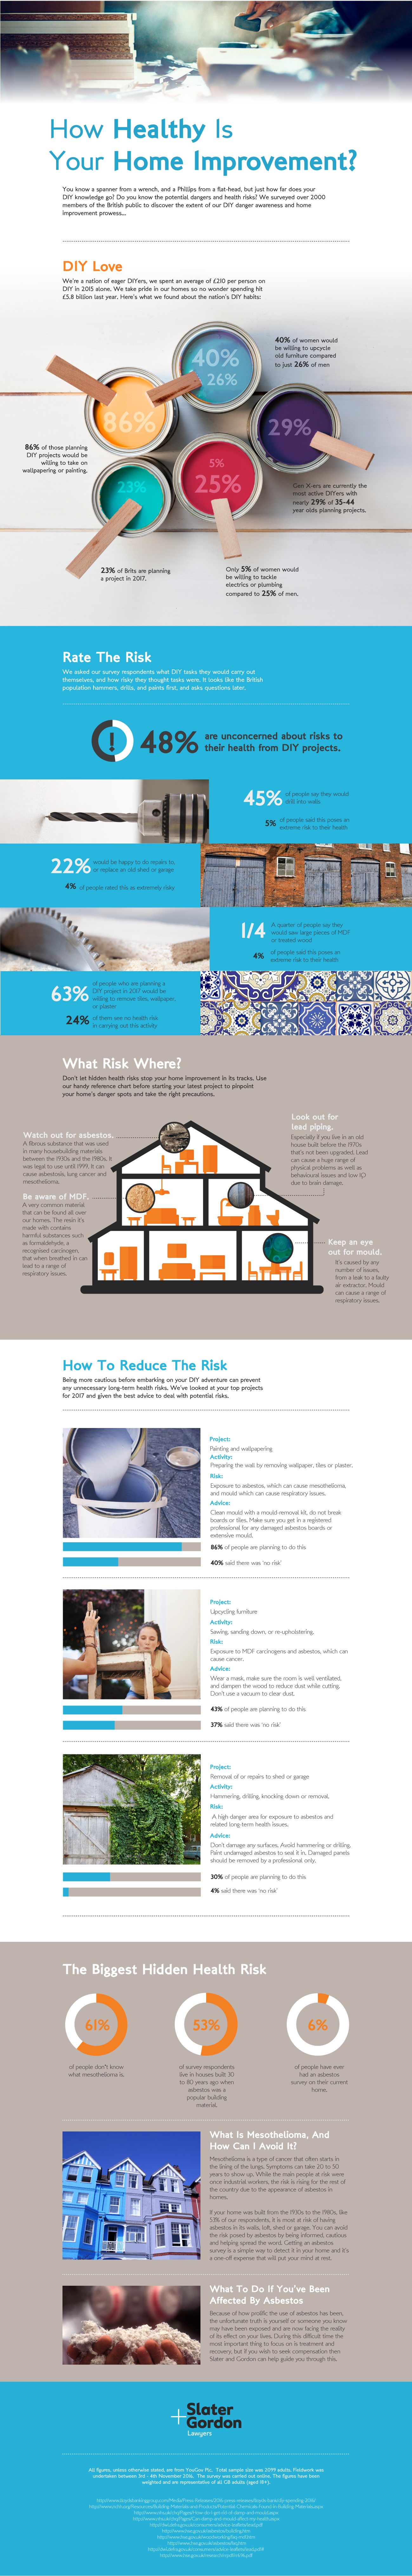 DIY safety infographic